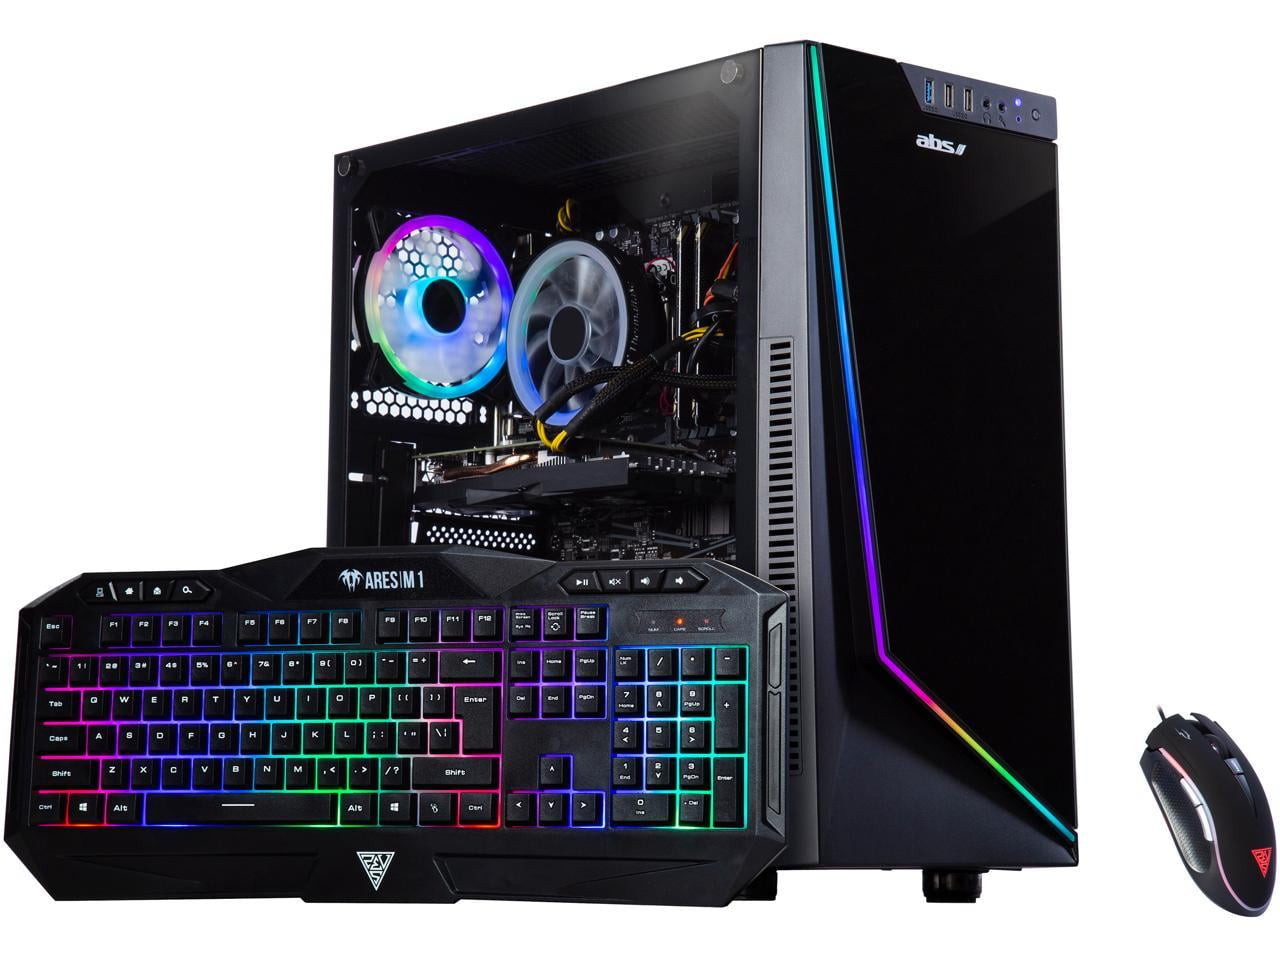 Pc Racing, Pc Gaming Completo, Intel Core I5-10400f, 16gb Ddr4 Ram